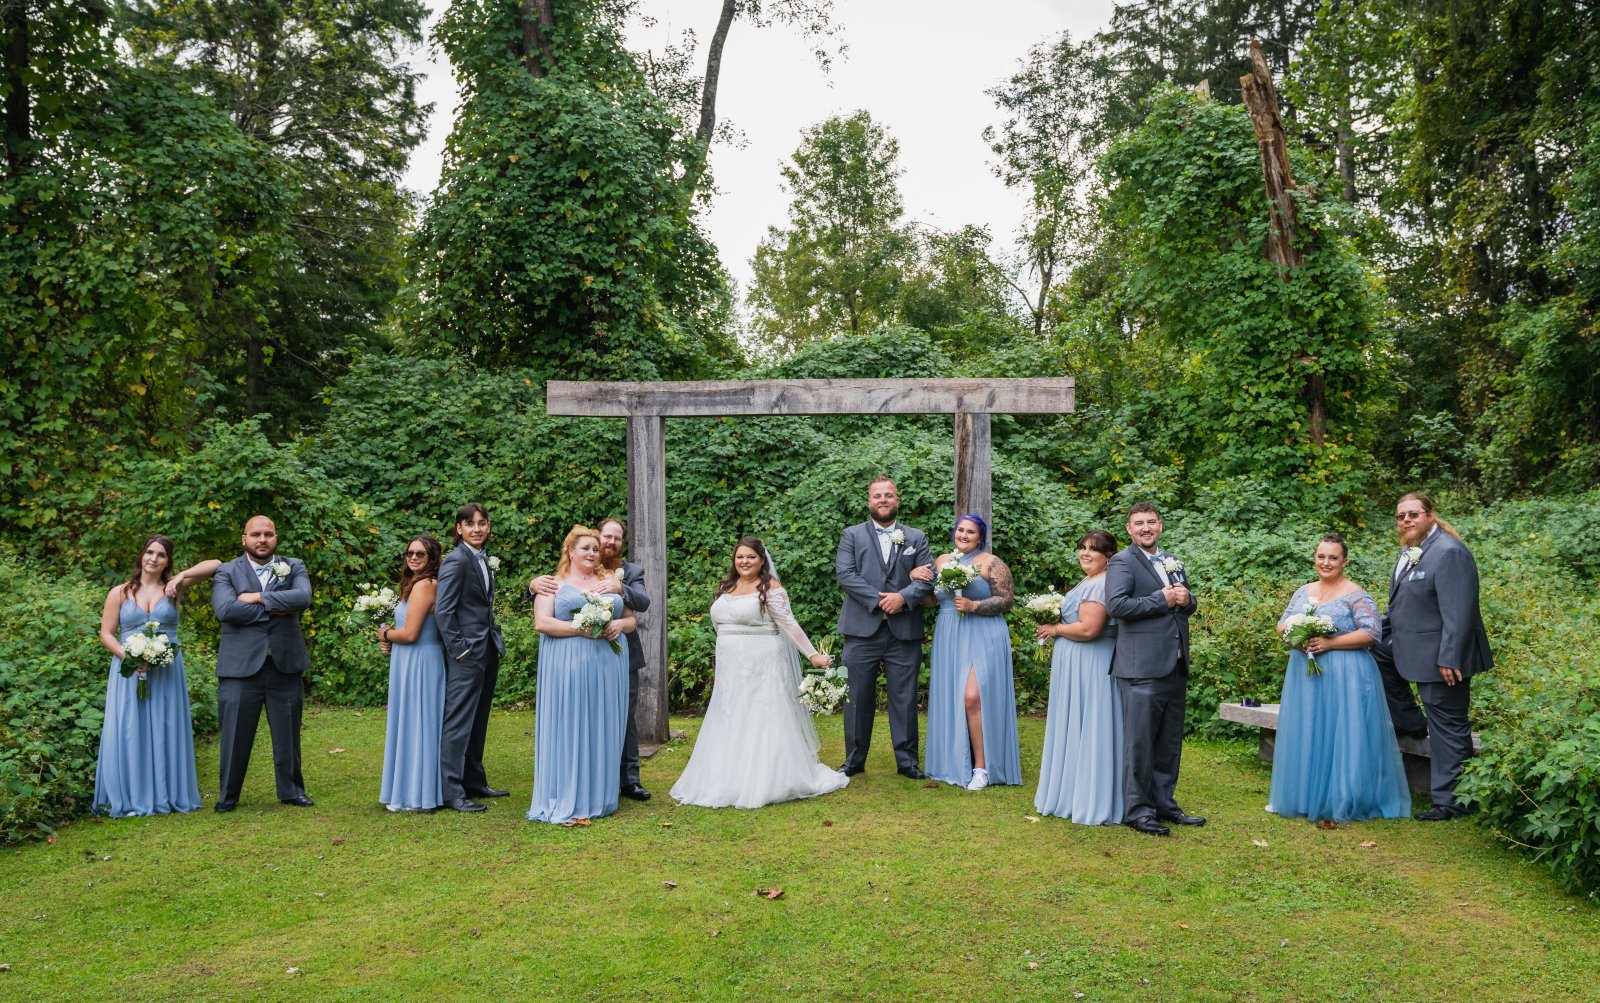 Bride with bridesmaids and groomsmen, bridal party portrait, rustic wooden arch, green, nature, trees, poses for large bridal party, outdoor September wedding ceremony at Westfall Event Center